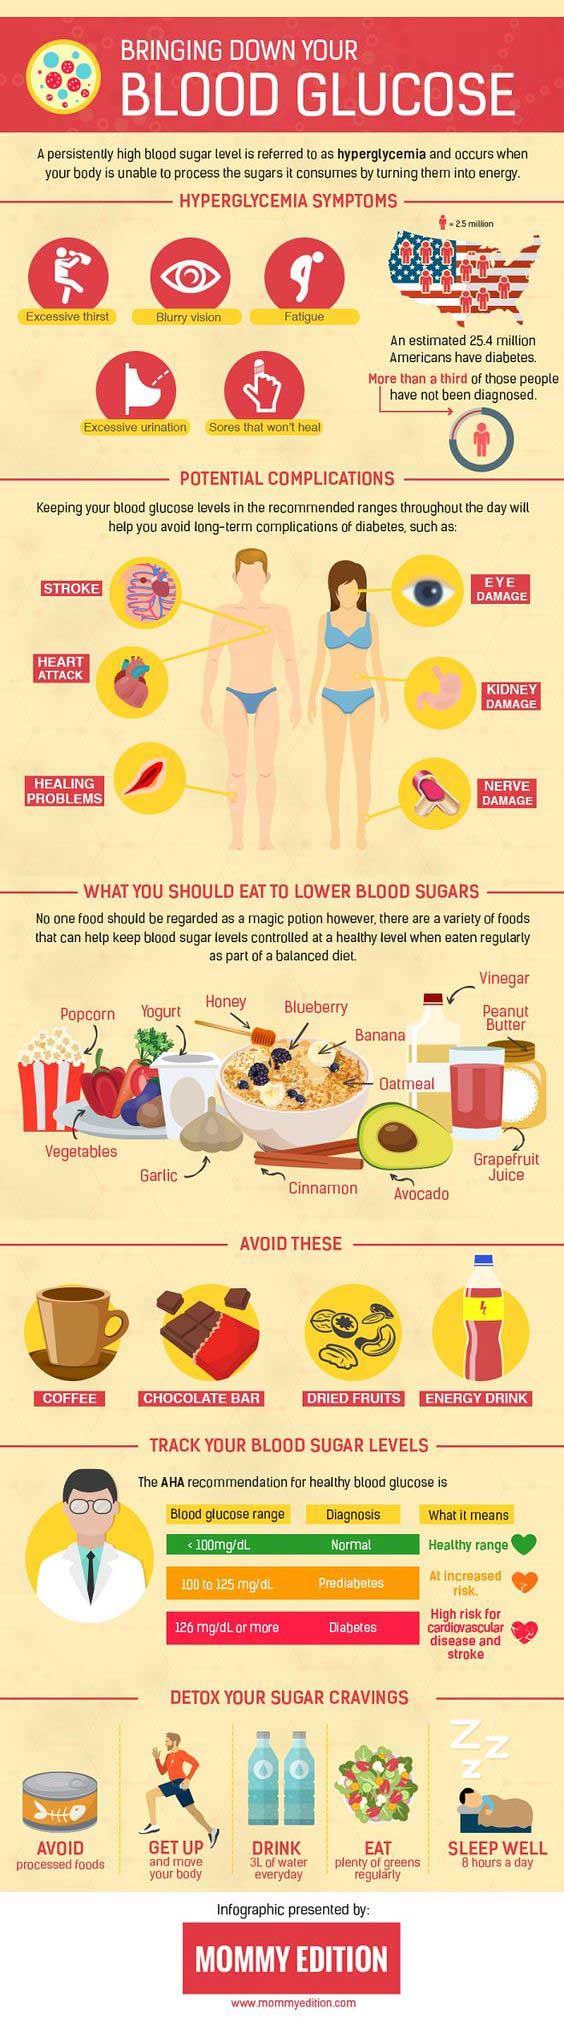 How To Bring Down Your Blood Sugar - Best Infographics